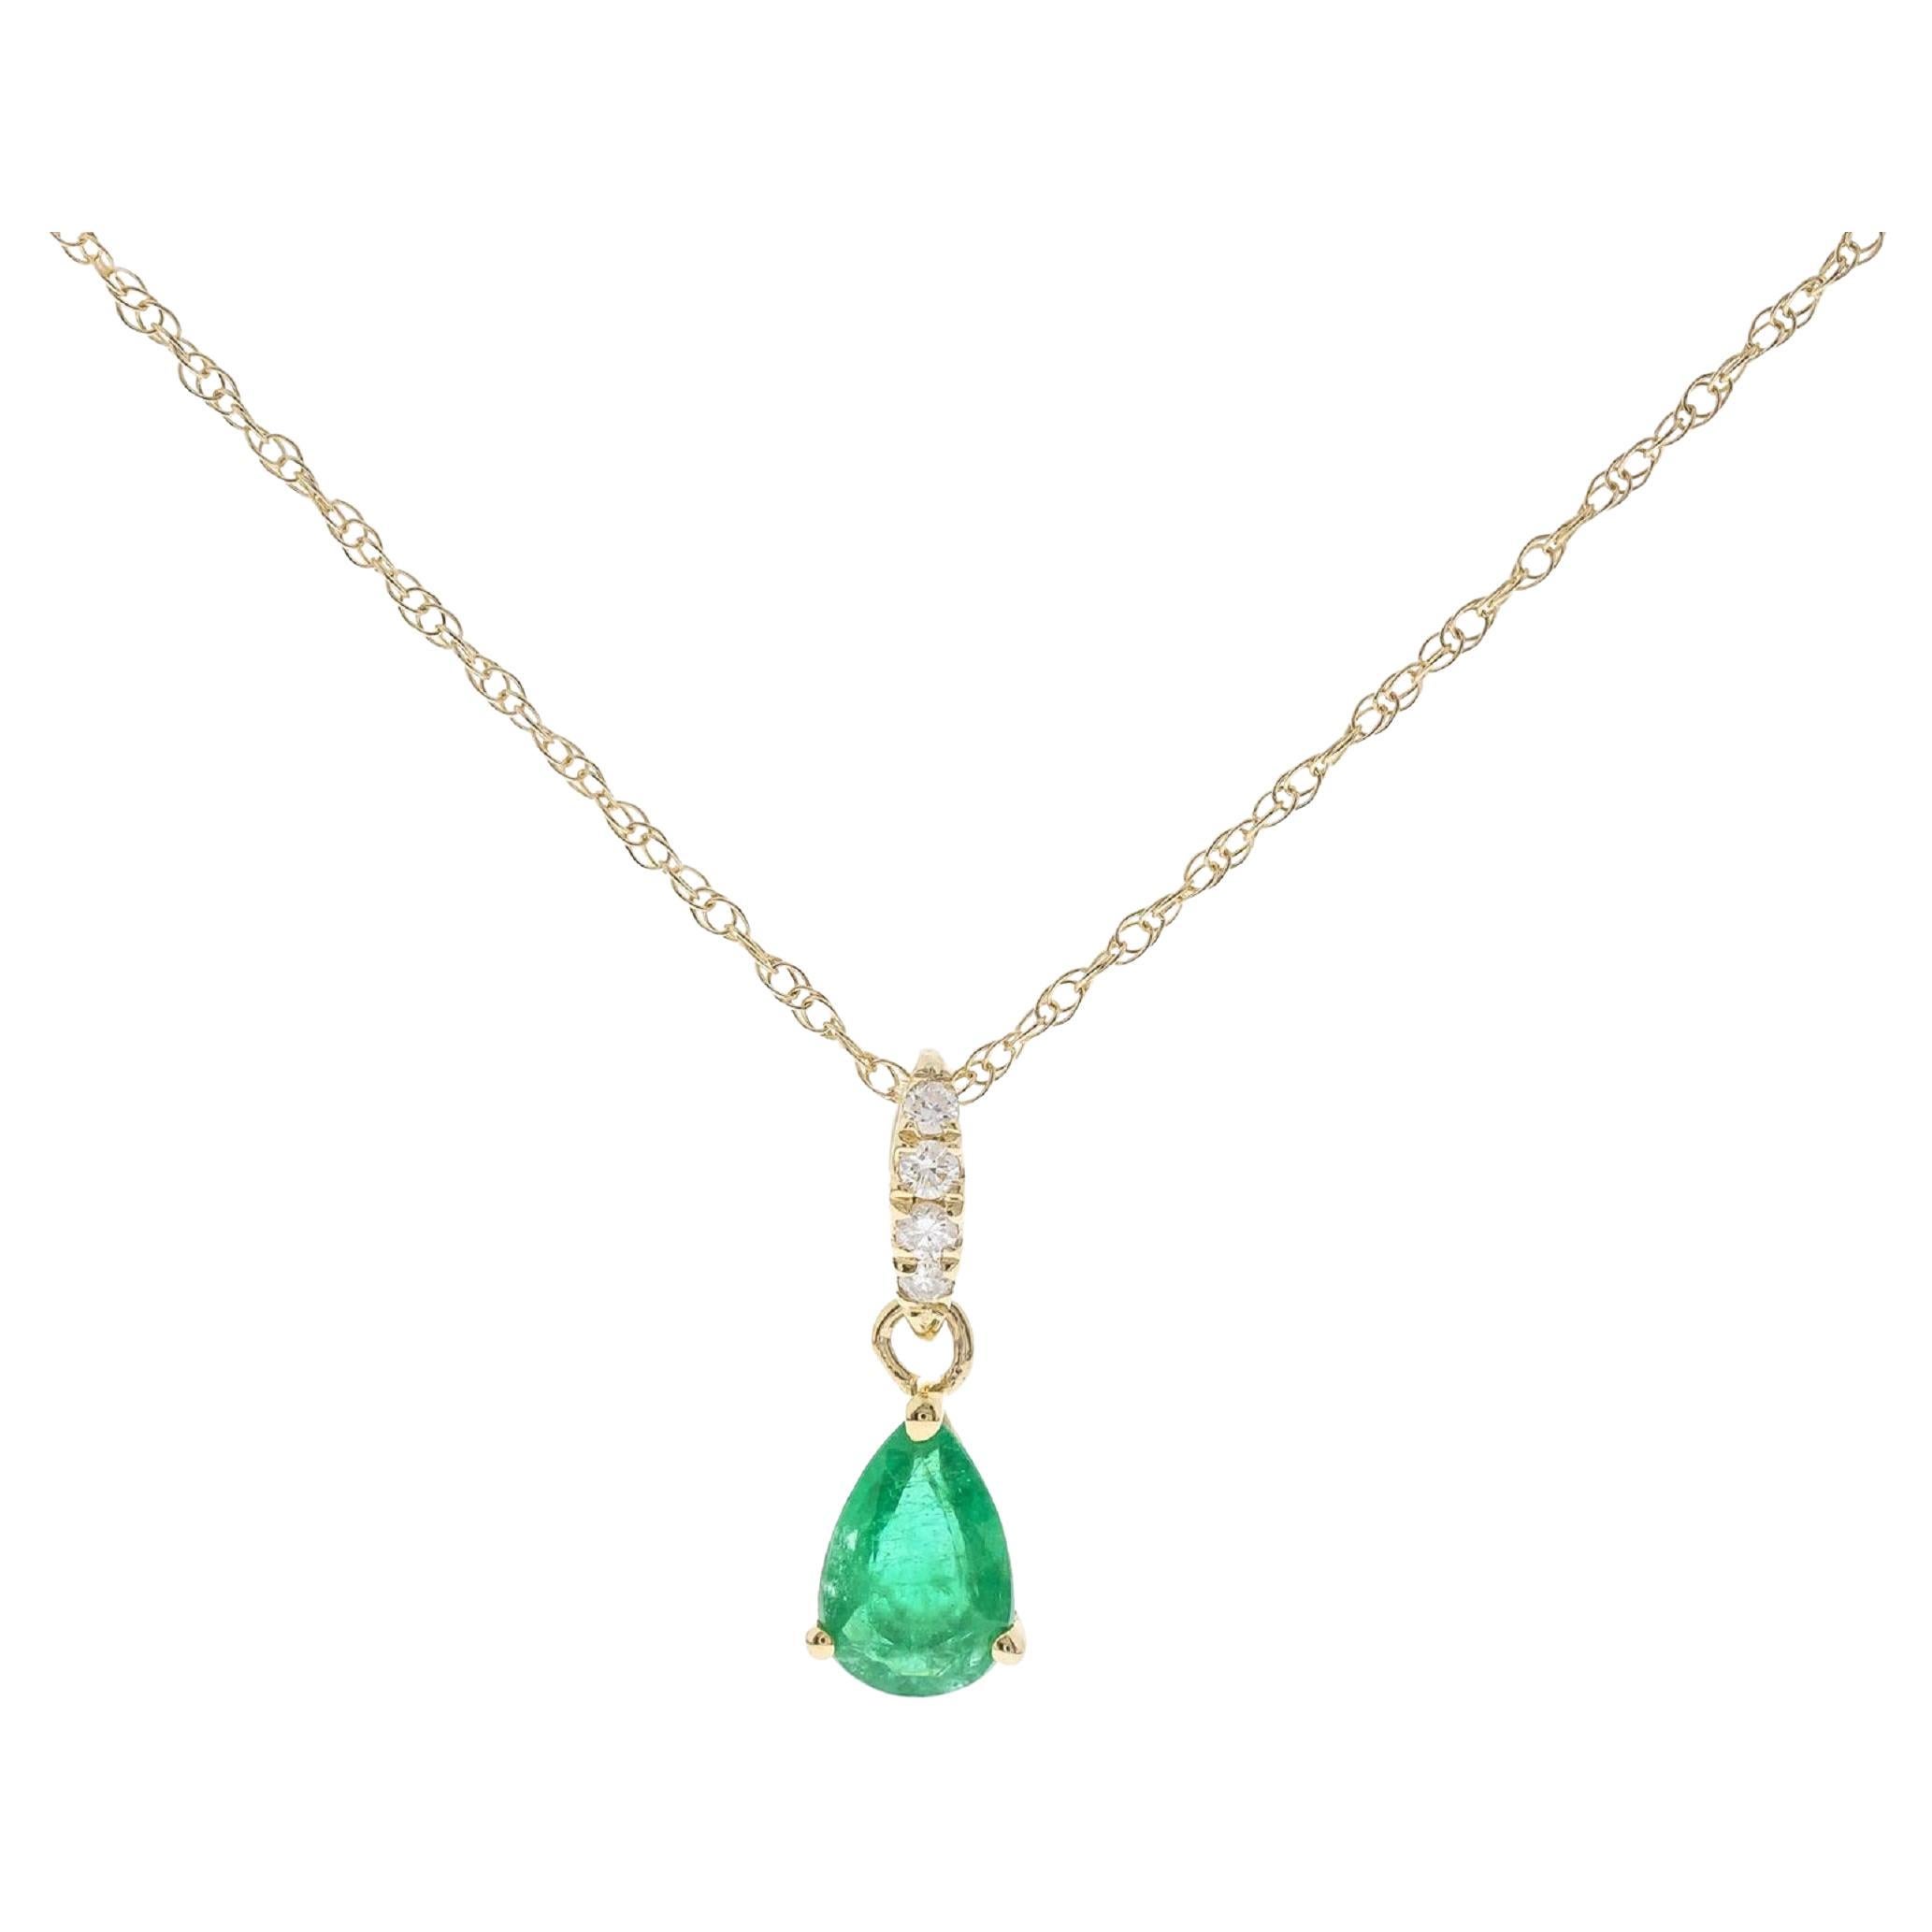 0.33 Carat Pear Cut Emerald with Diamond Accents 10K Yellow Gold Pendant